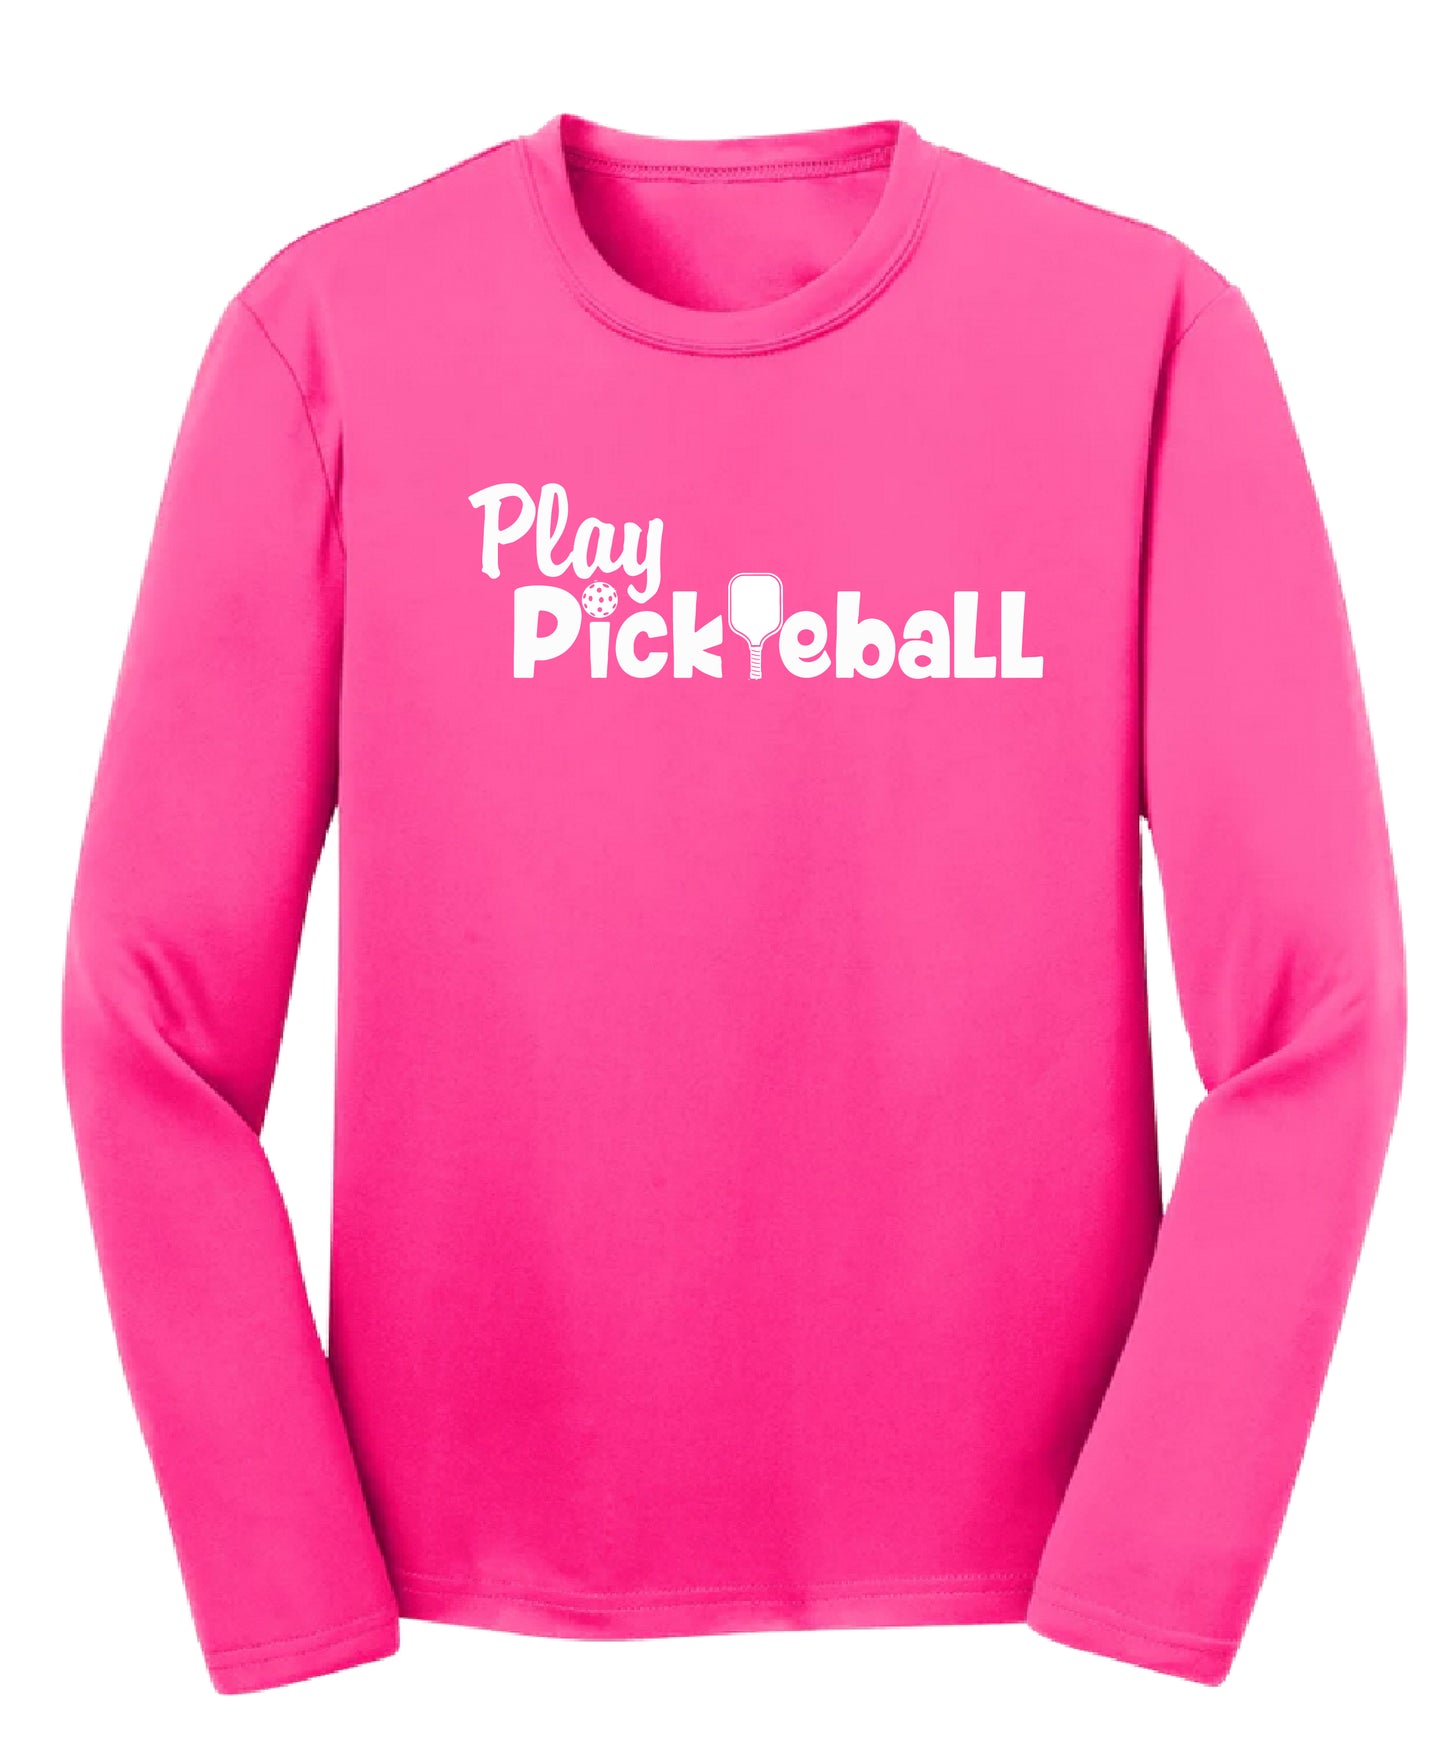 Play Pickleball | Youth Long Sleeve Athletic Pickleball Shirt | 100% Polyester